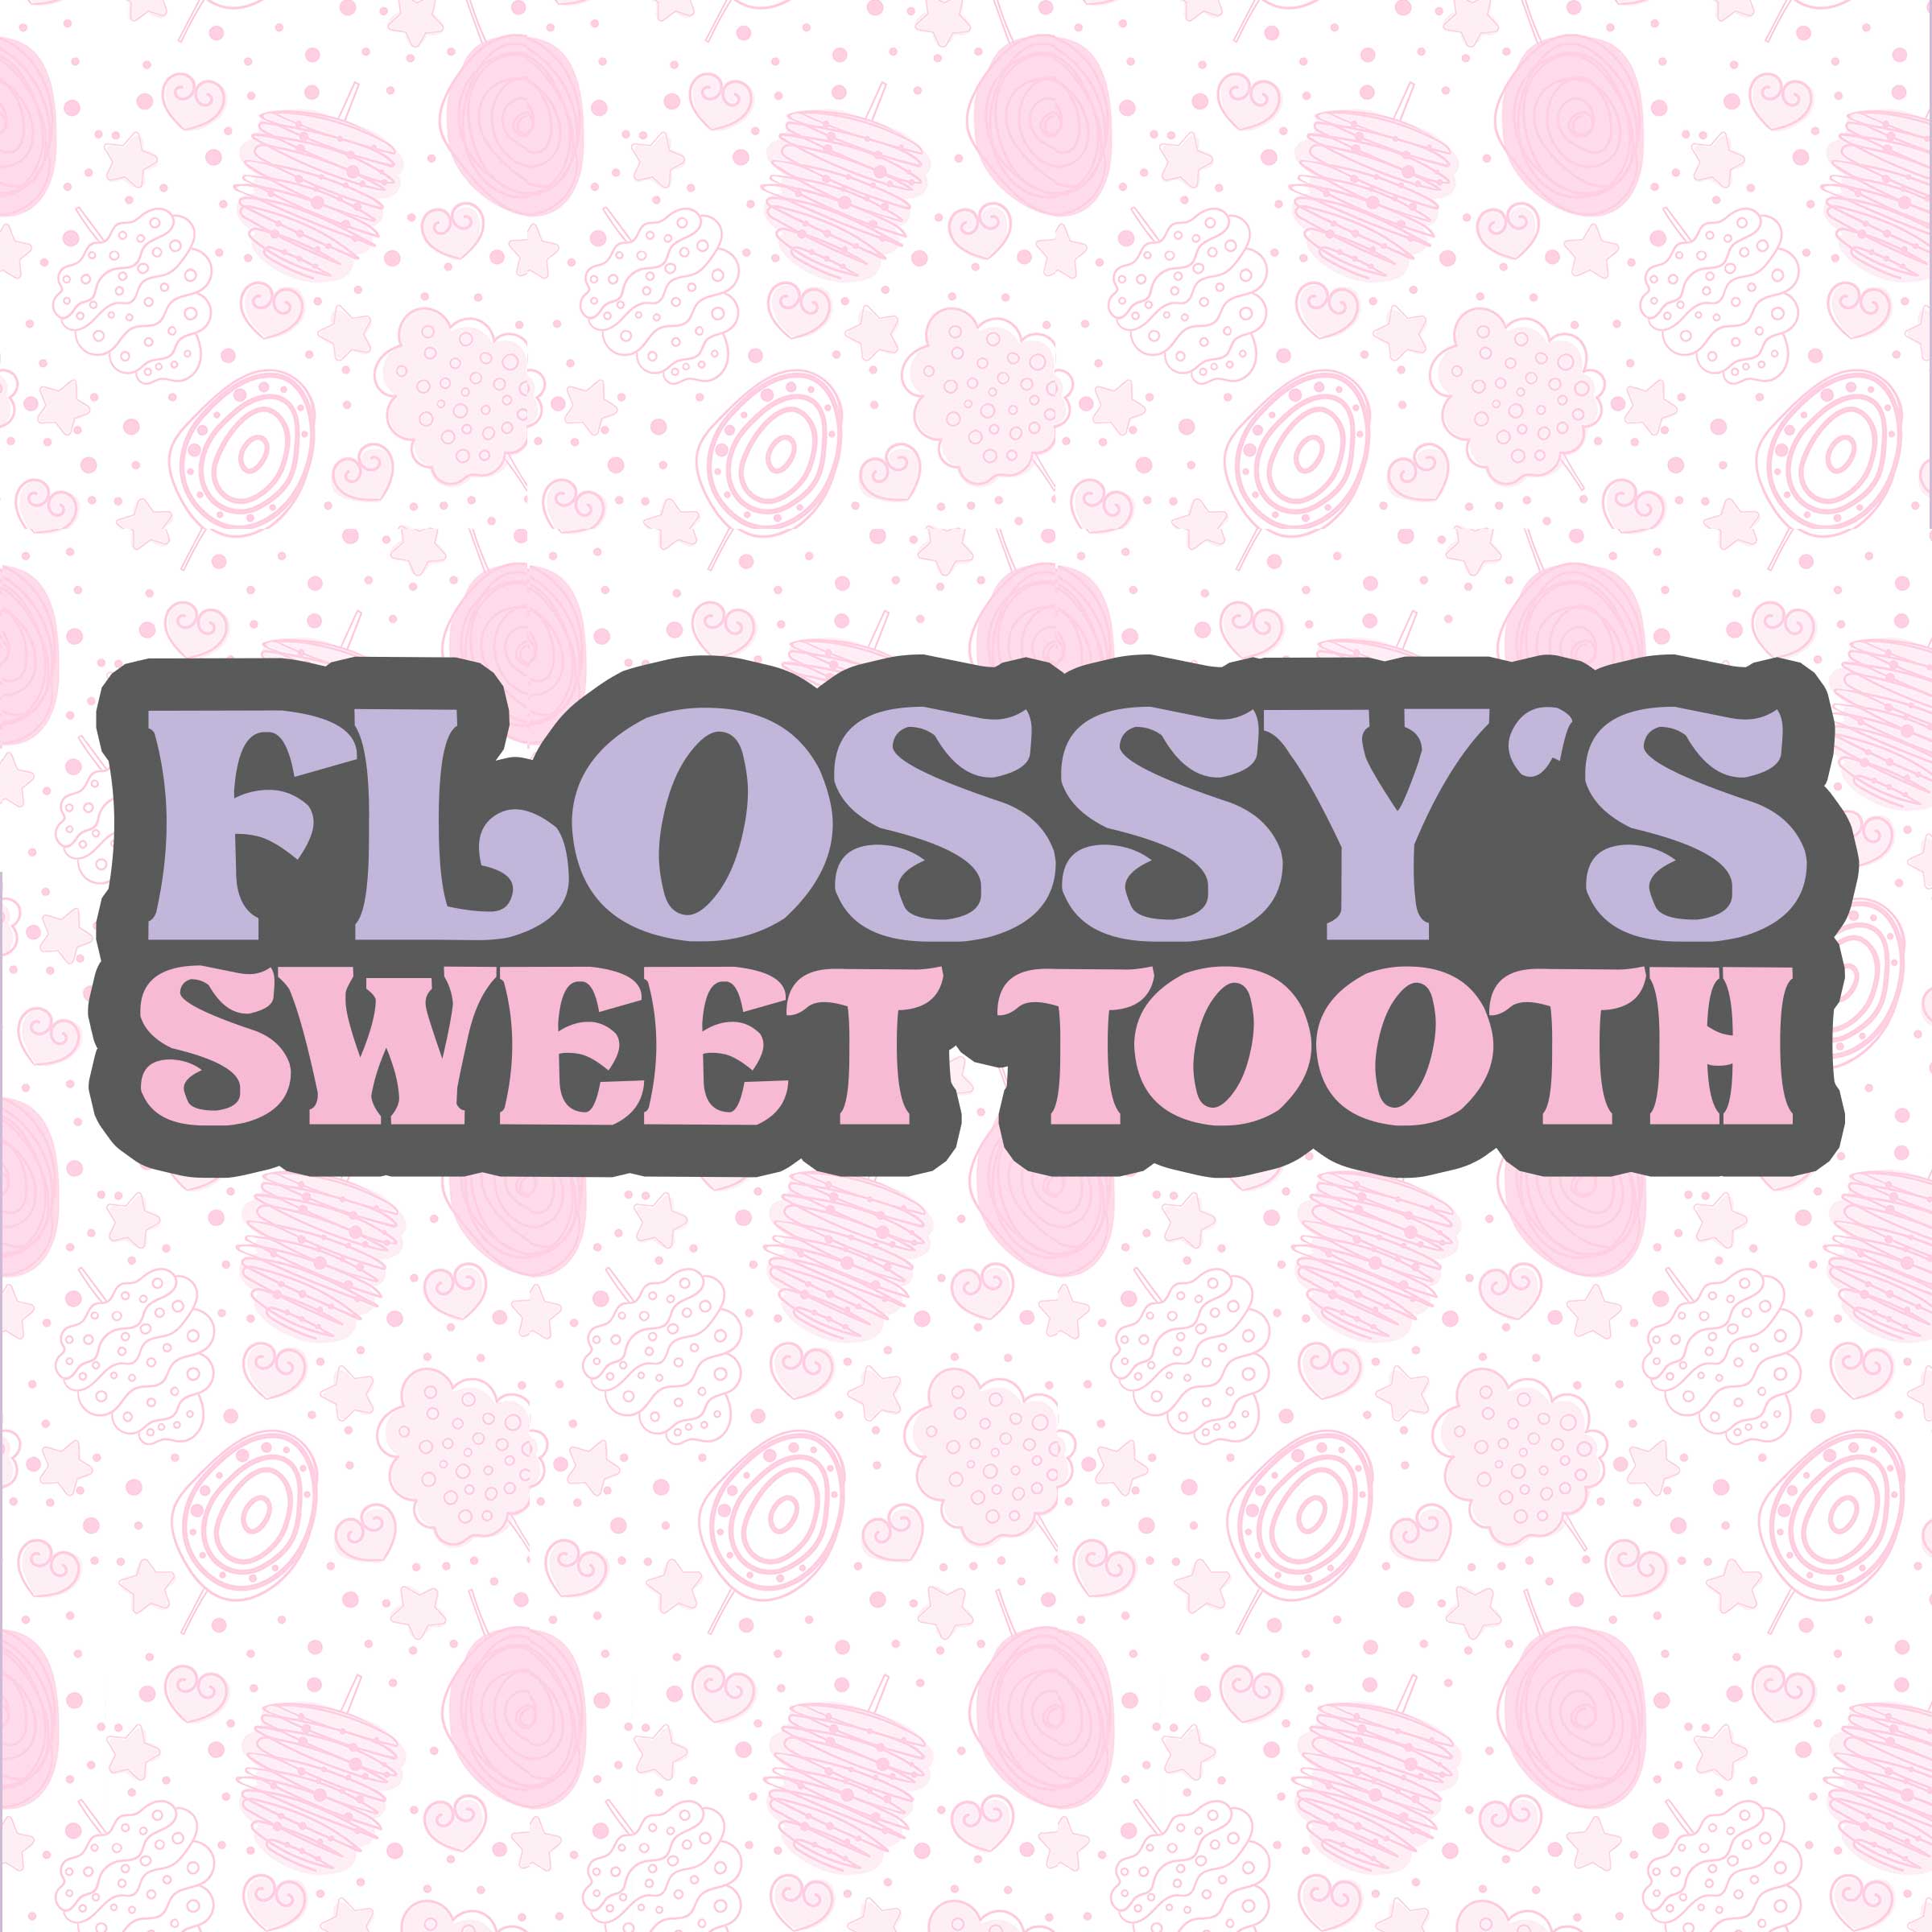 Branding for Flossy's Sweet Tooth